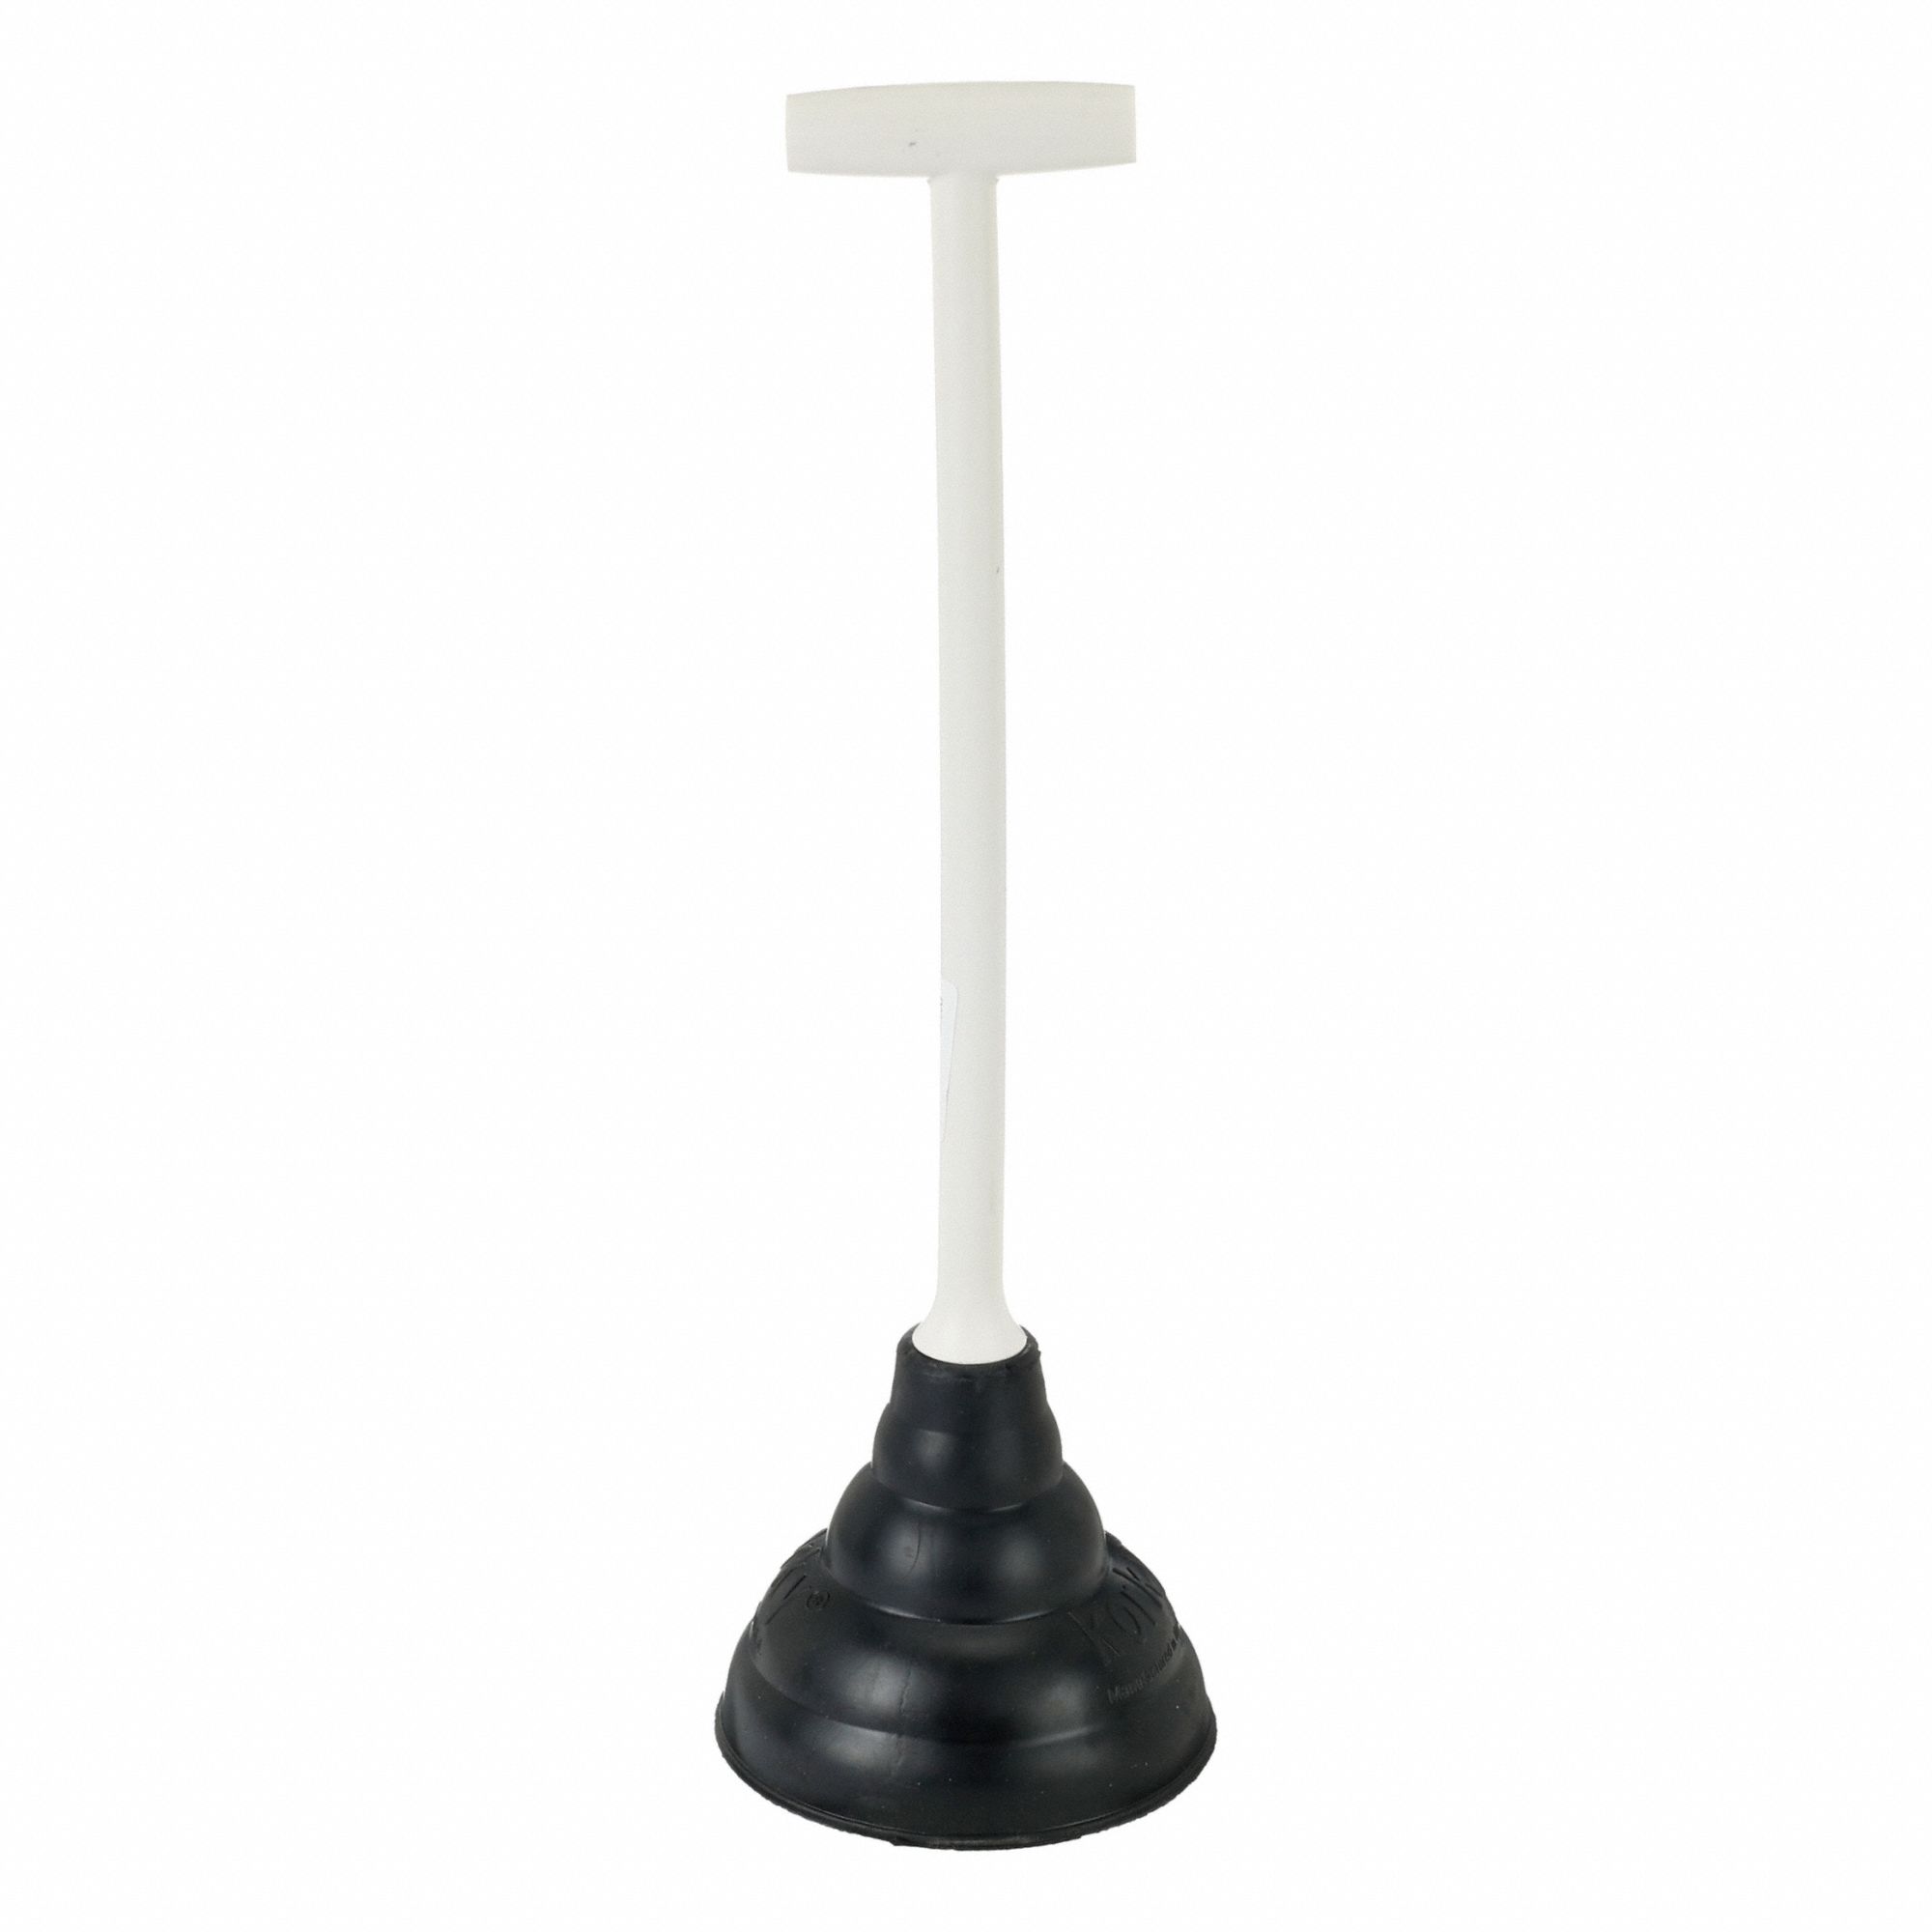 Forced Cup Plungers